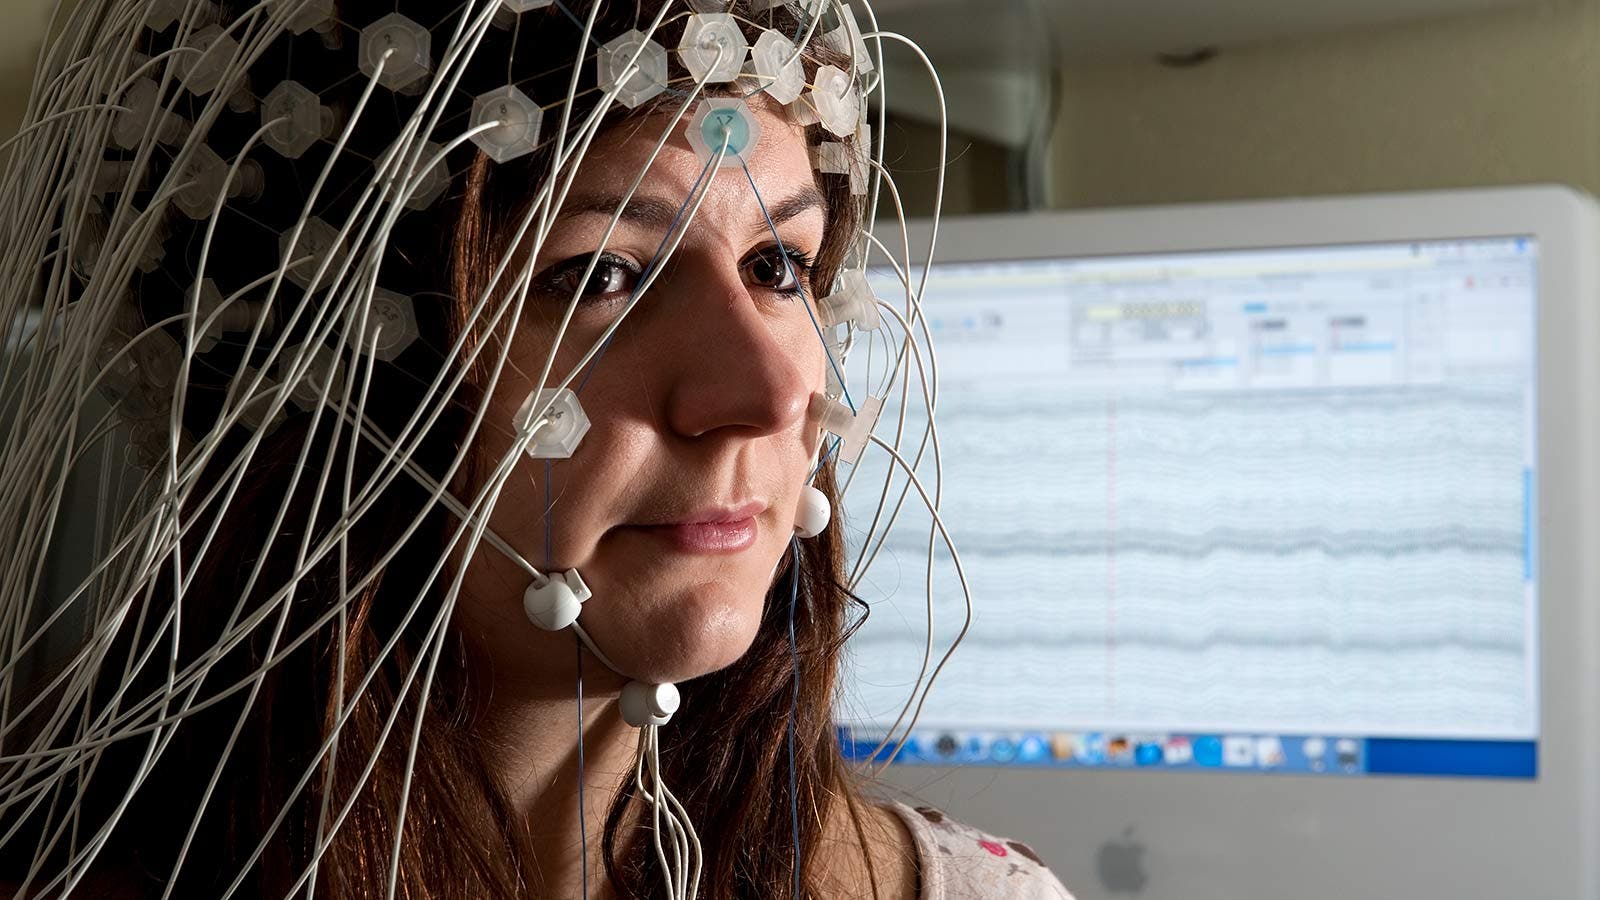 A woman plugged into a brain activity monitoring device